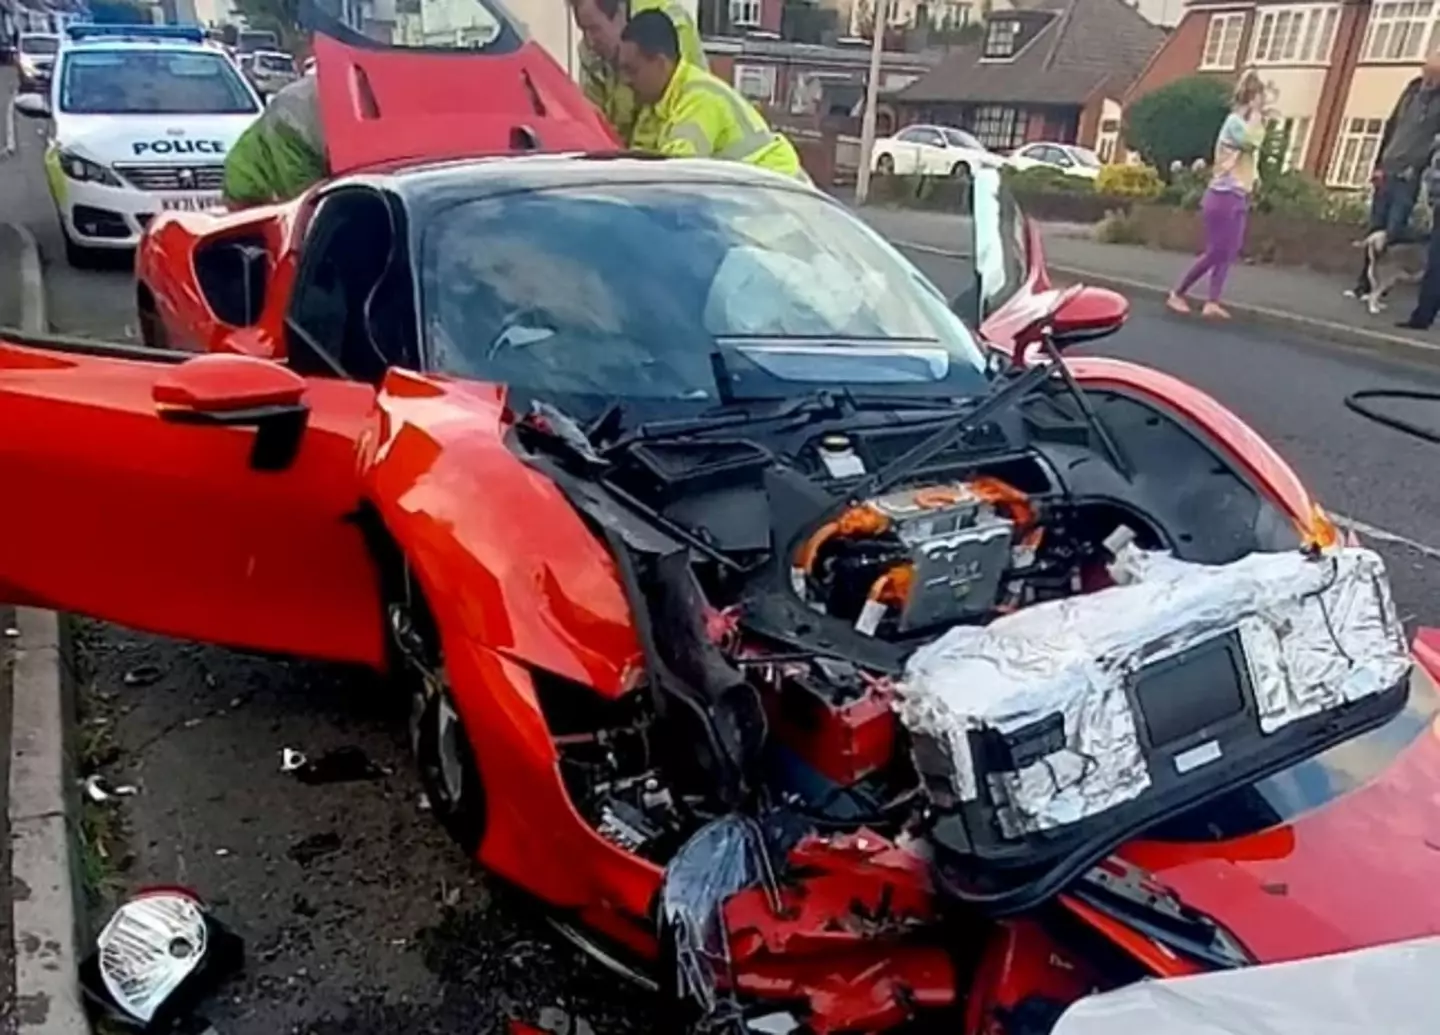 The front of the Ferrari was left crumpled following the crash.